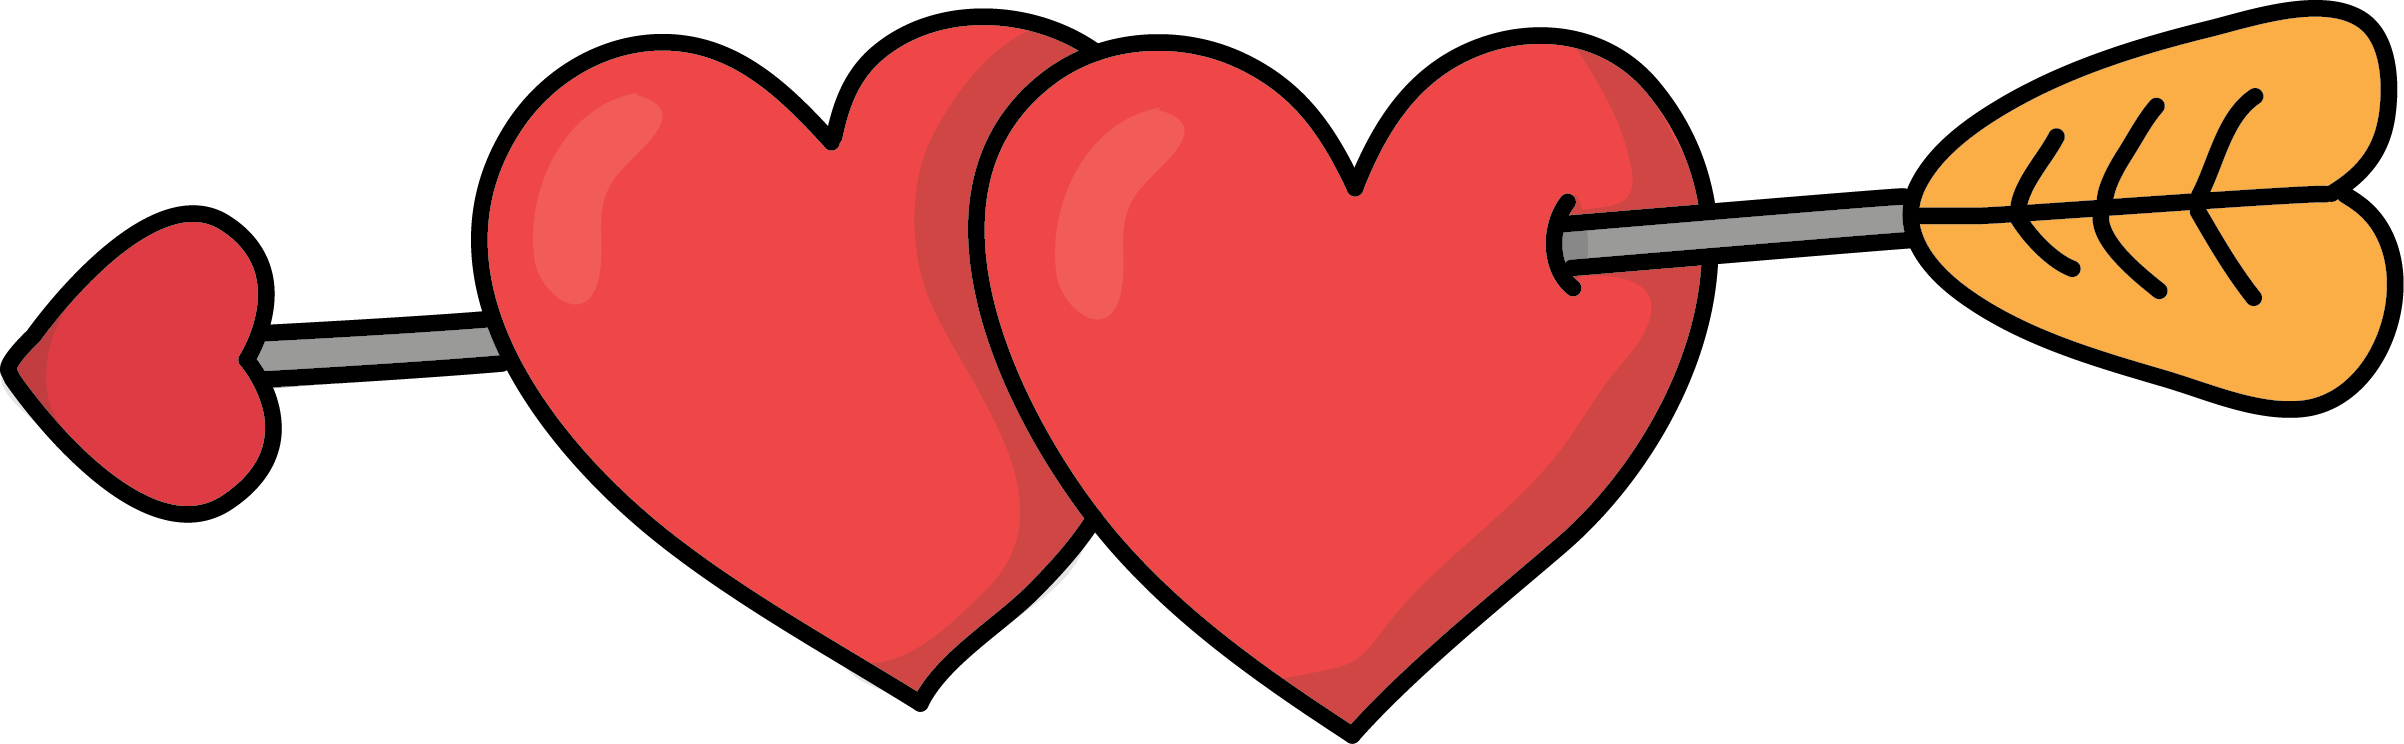 Clipart Resolution 2404*744 - 2 Hearts With Arrow (2404x744)